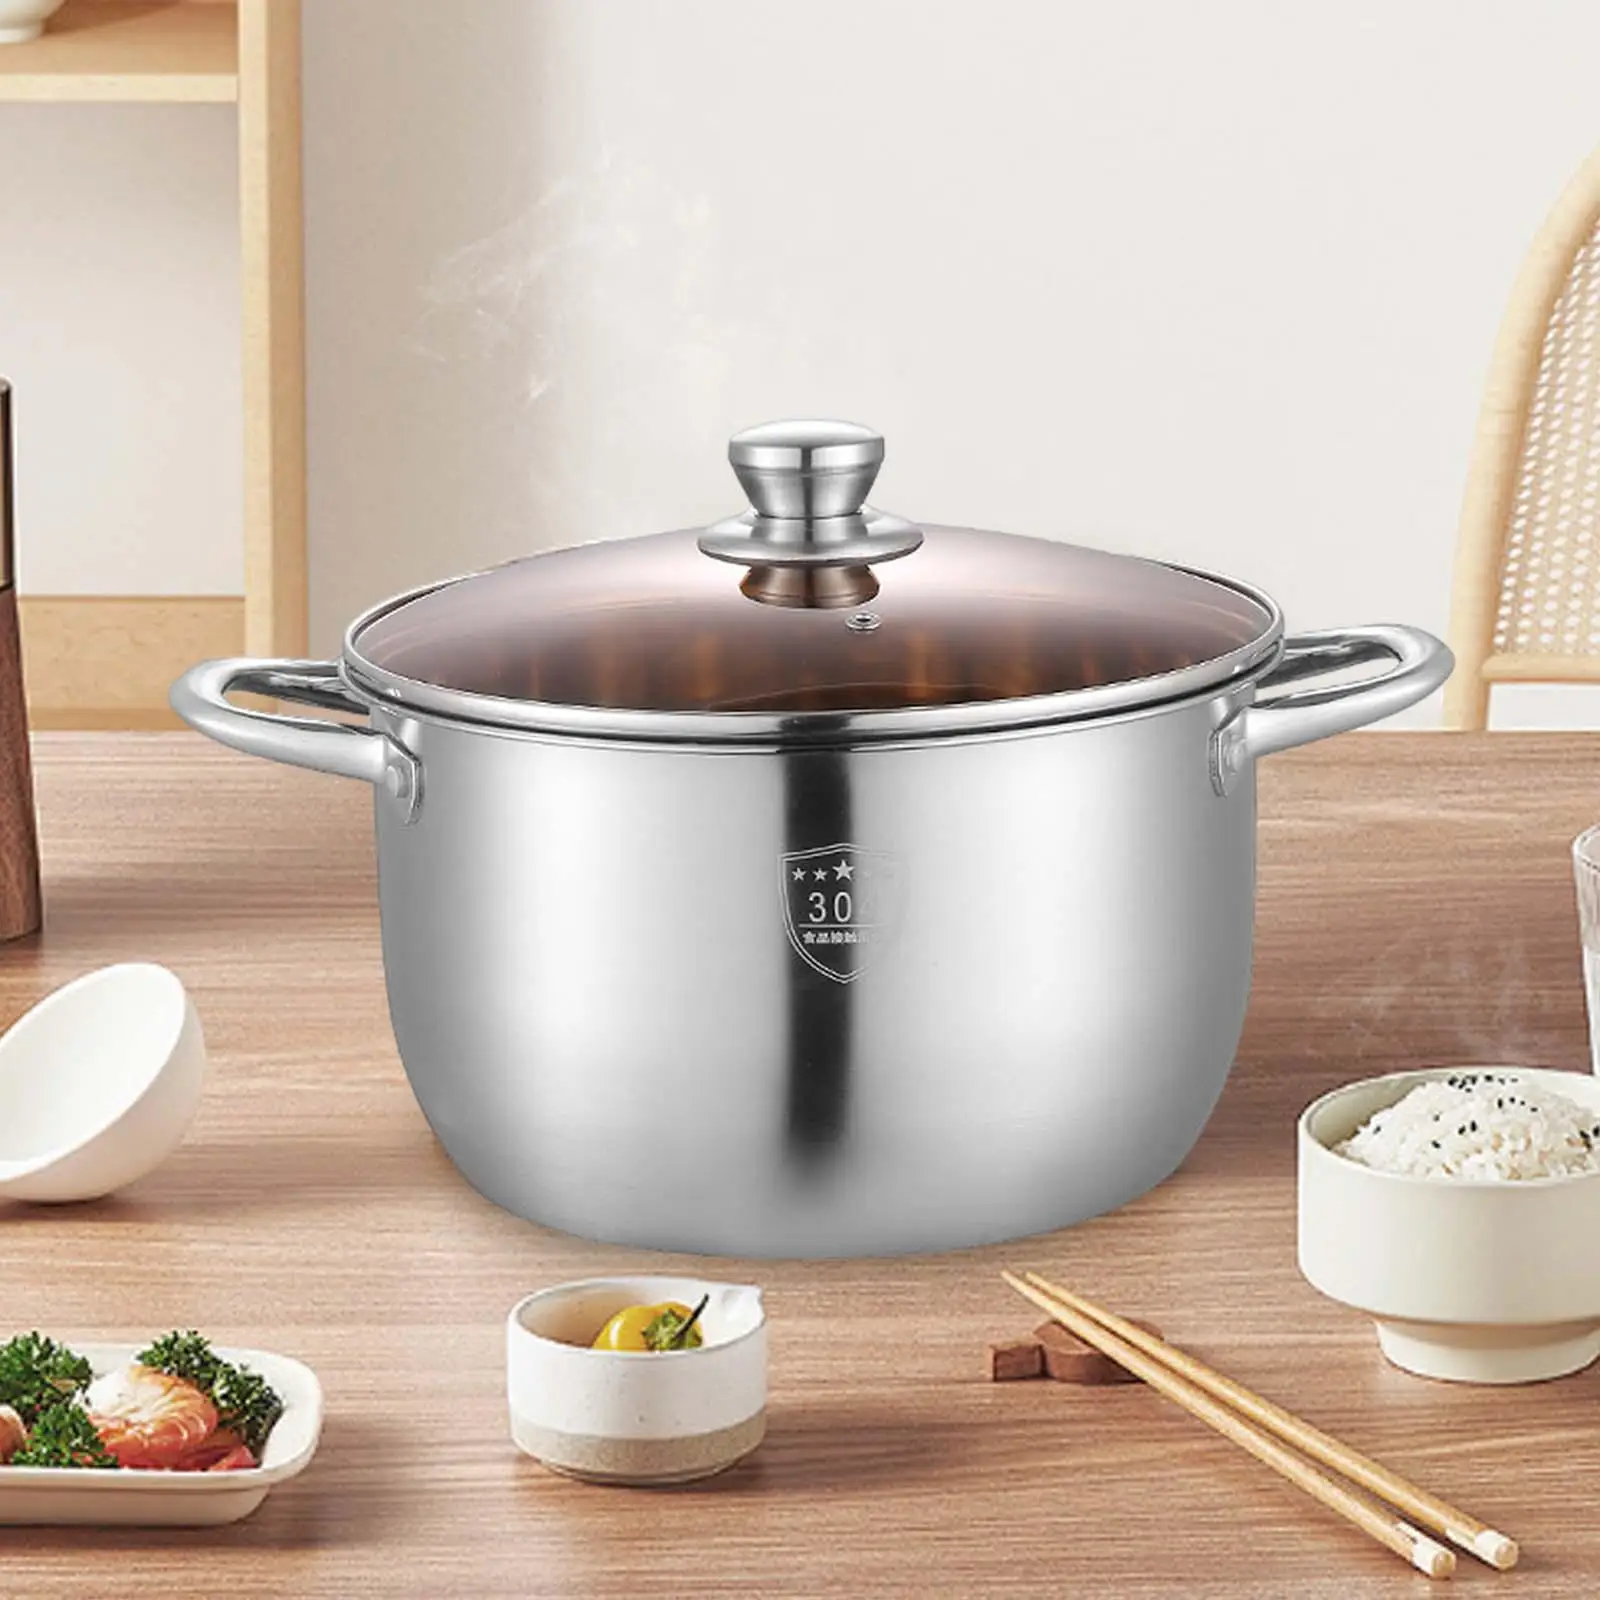 Stainless Steel Stockpot with Lid Dual Handle Suitable for All Stoves Small Saucepan for Sauce Vegetables Warming Milk Soup Meat